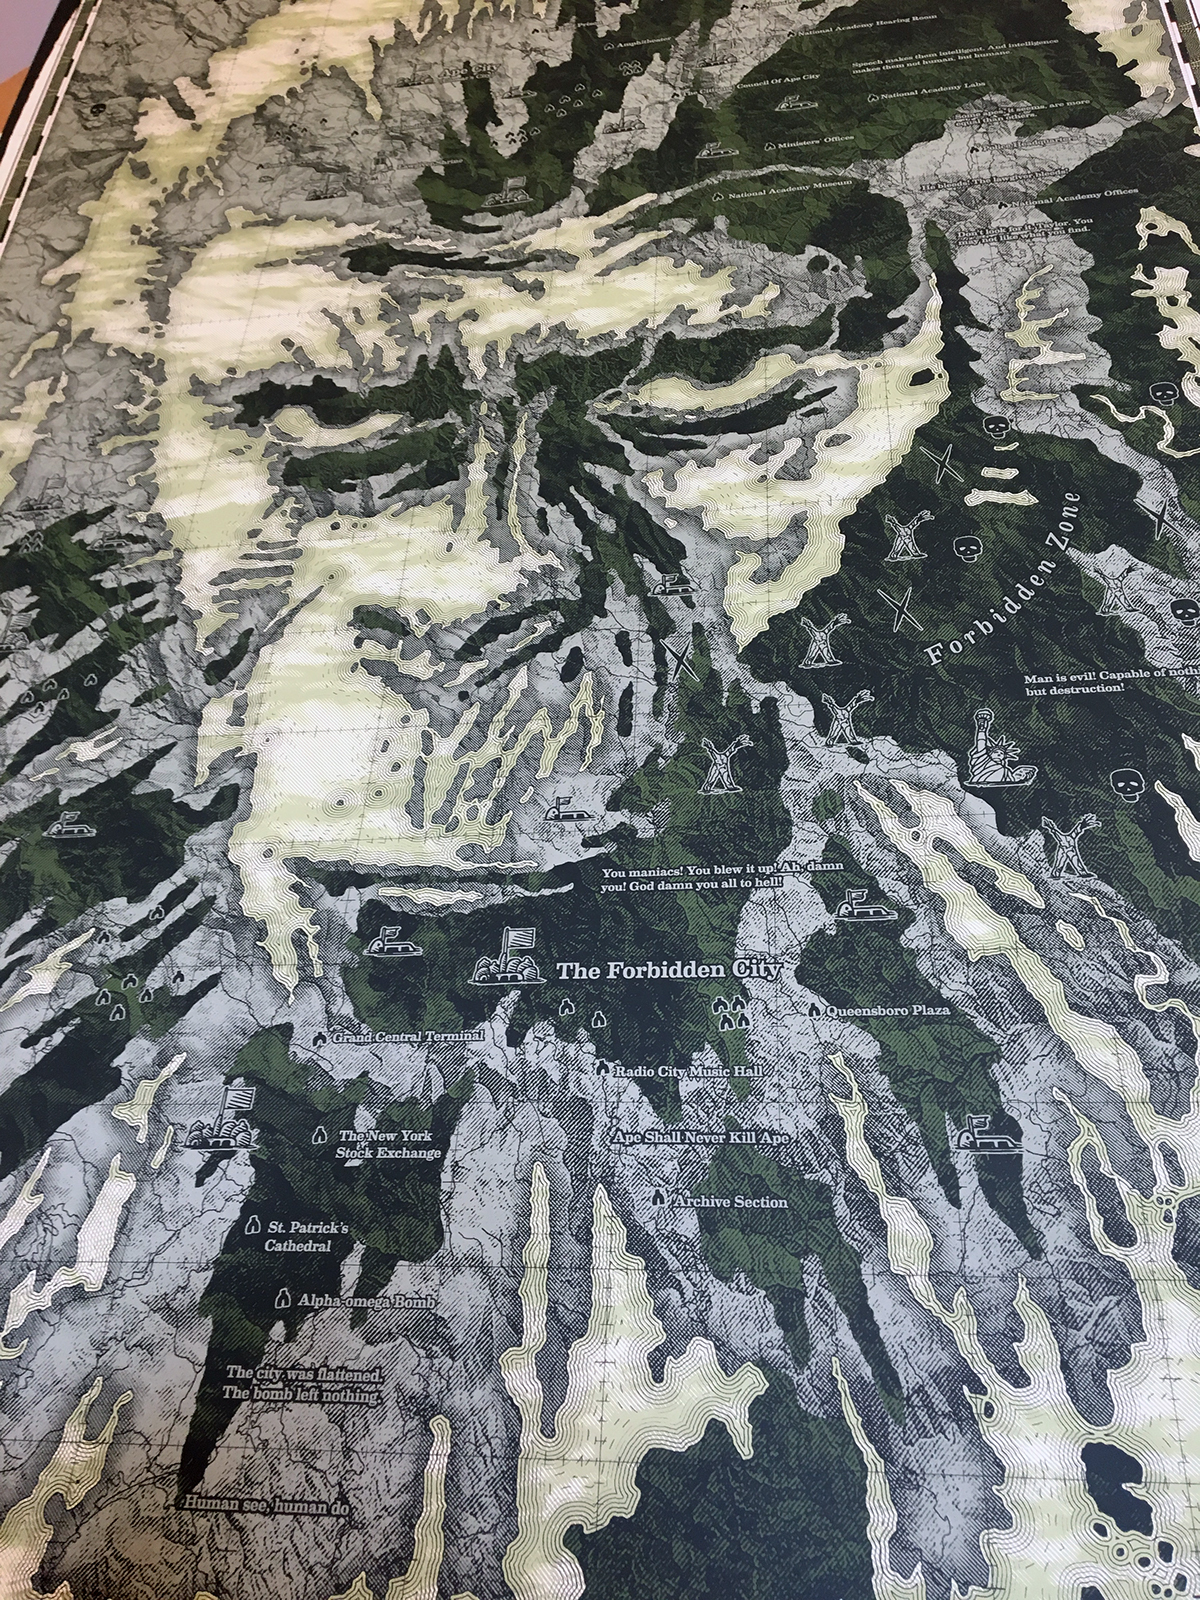 planet of the apes poster screen print Charts diagram map Forbidden zone